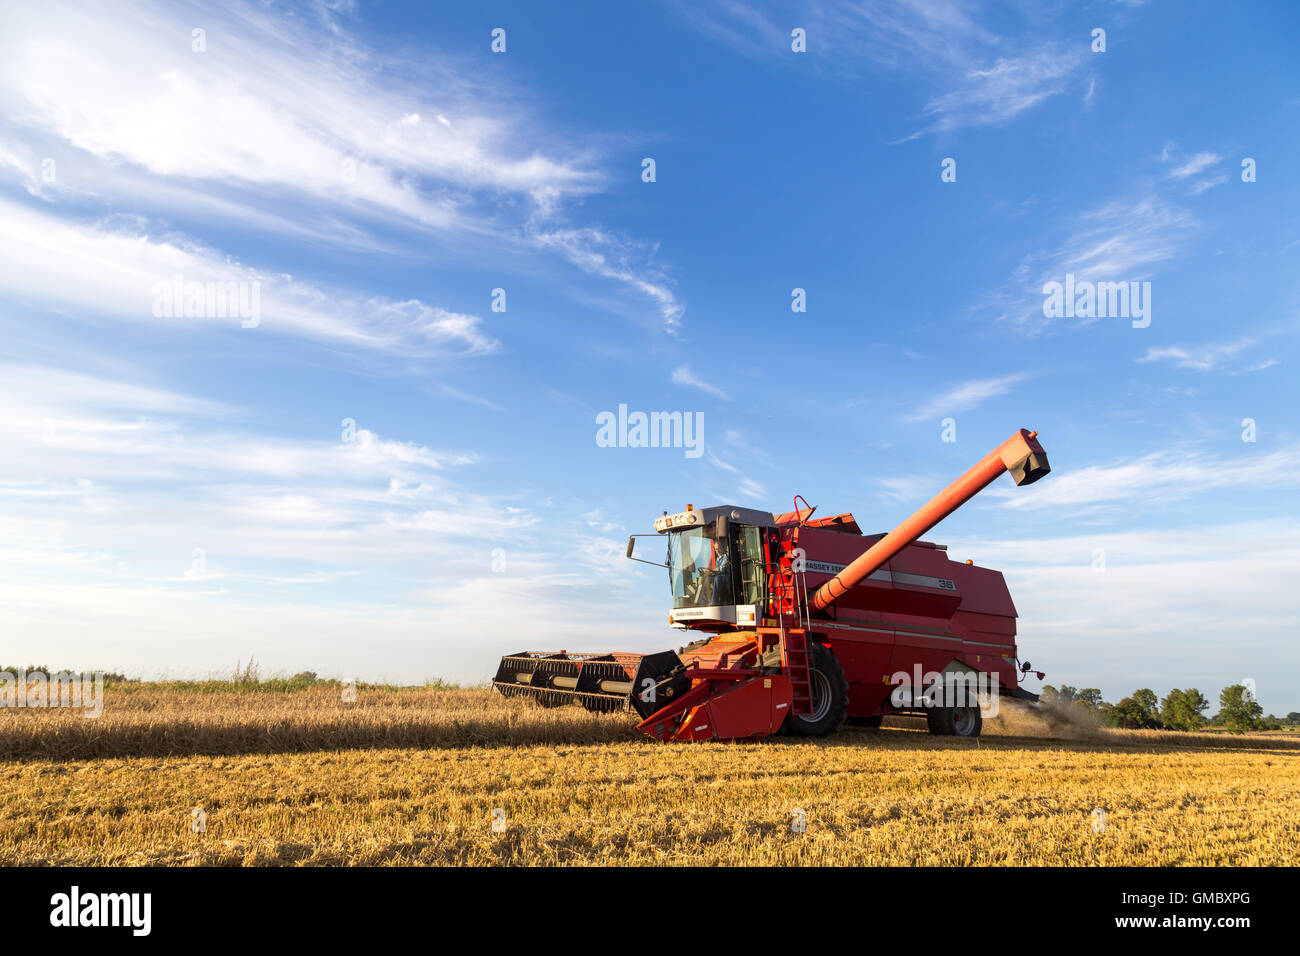 Ramlose, Denmark - August 24, 2016:  A combine harvester at work on a field Stock Photo